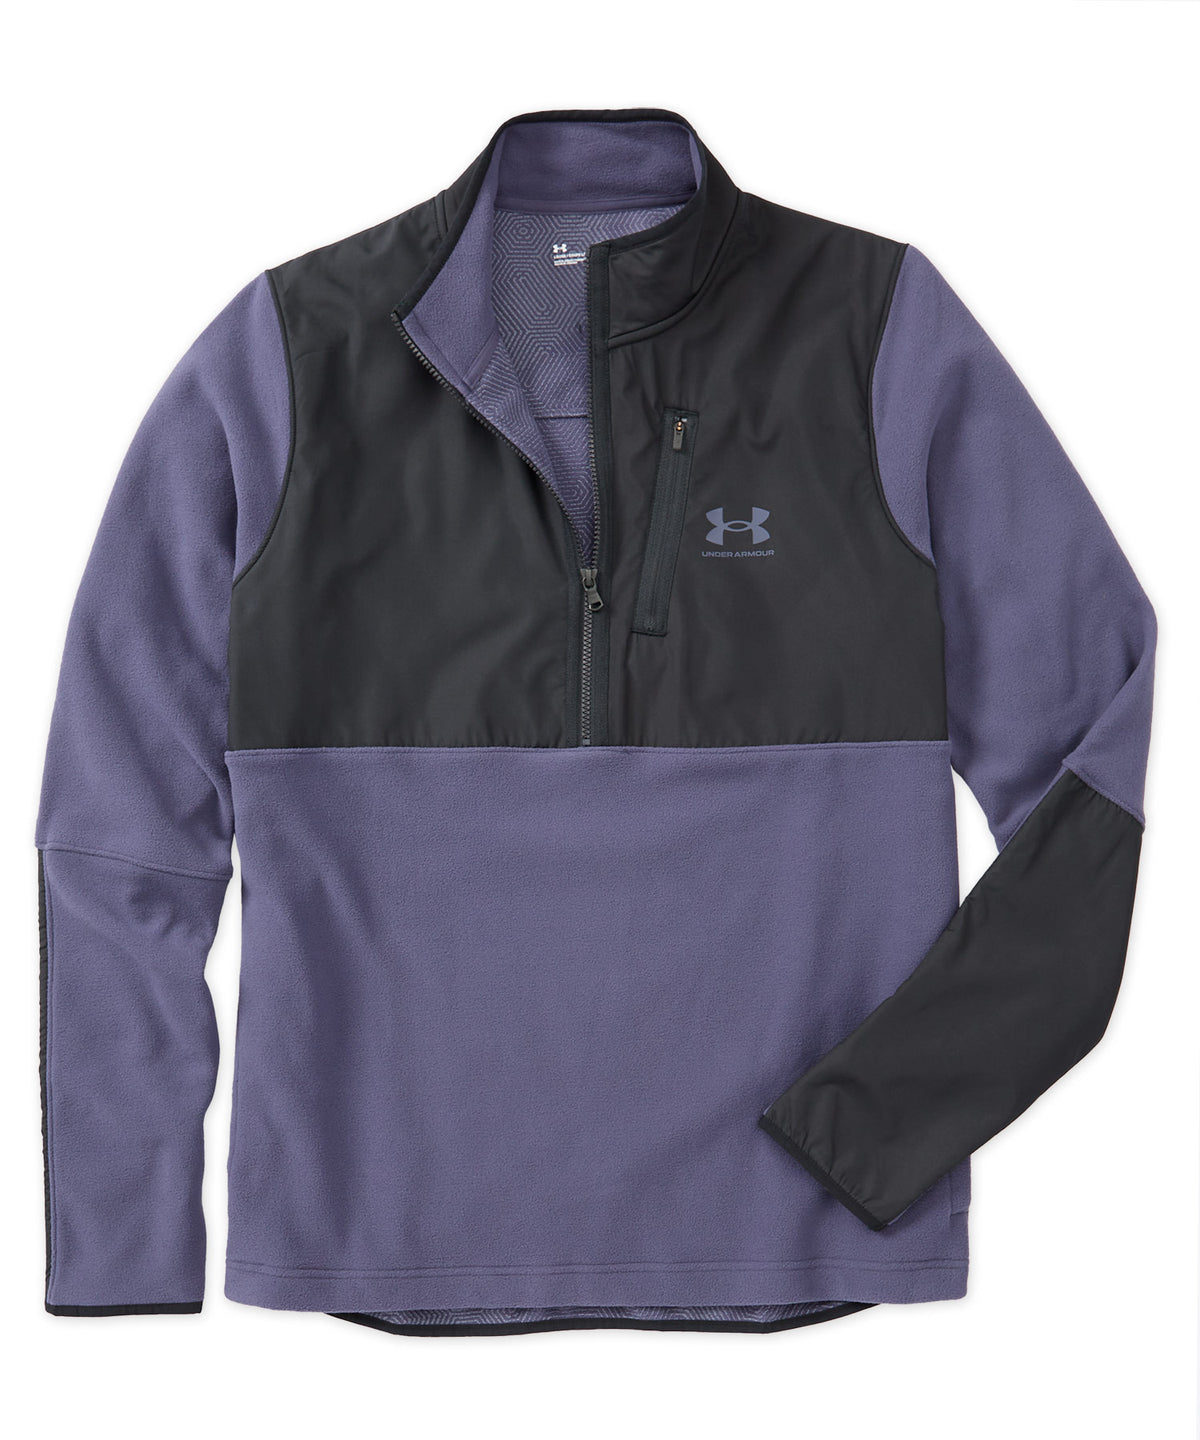 Under Armour Cold Gear Infrared Half-Zip Pullover, Men's Big & Tall